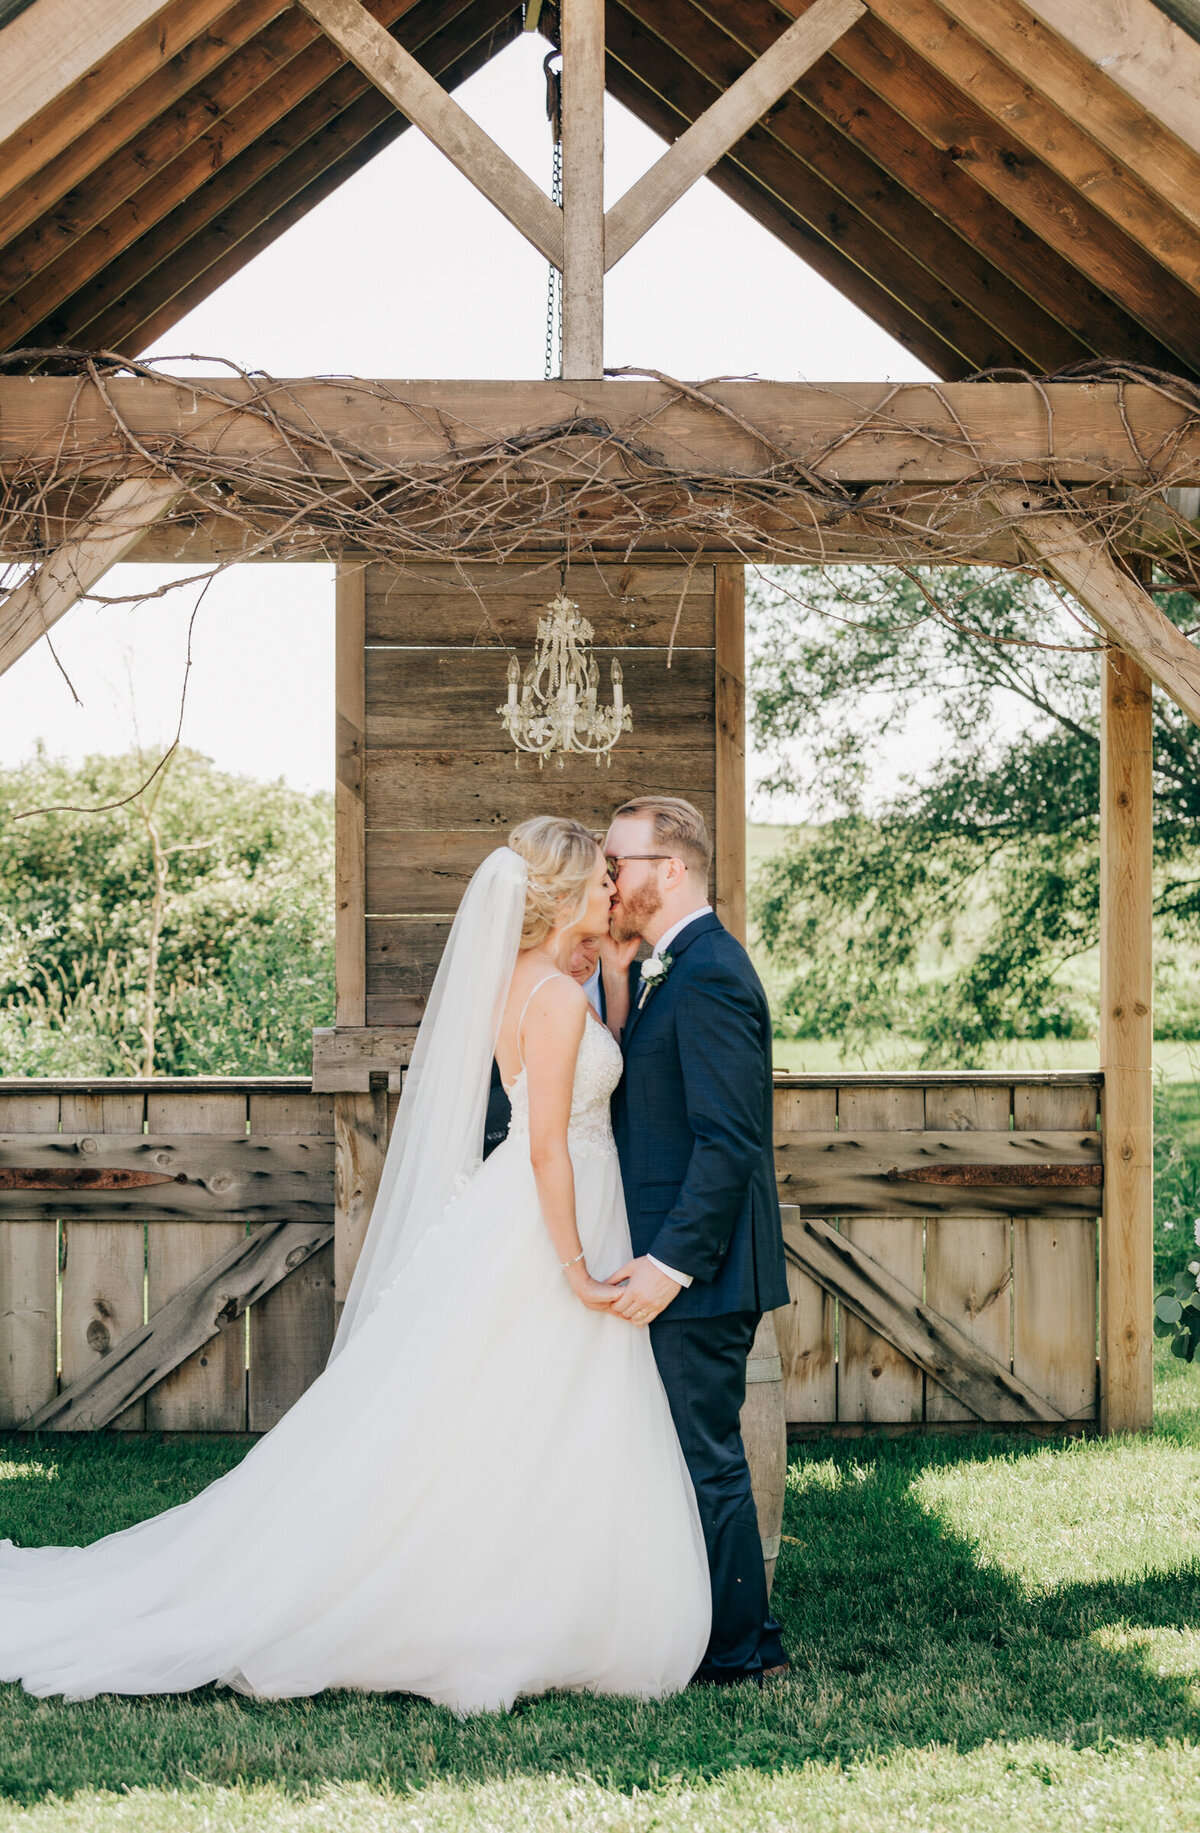 Bride and groom first kiss at luxurious outdoor ceremony